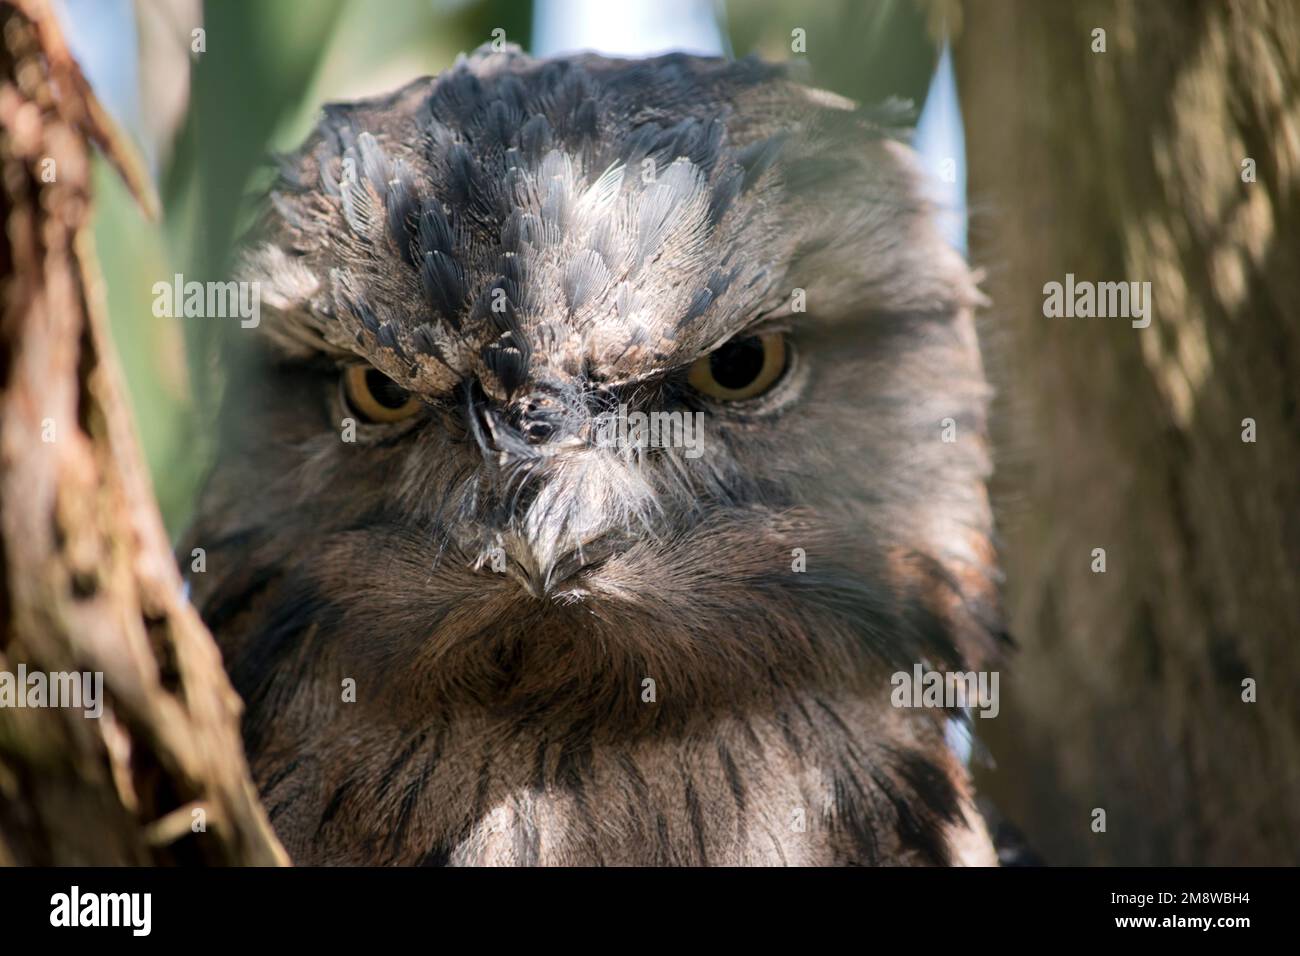 Tawny frogmouths have greyish feathers, lighter below, streaked with darker grey and some reddish tints. Their large eyes have a yellow iris, and the Stock Photo